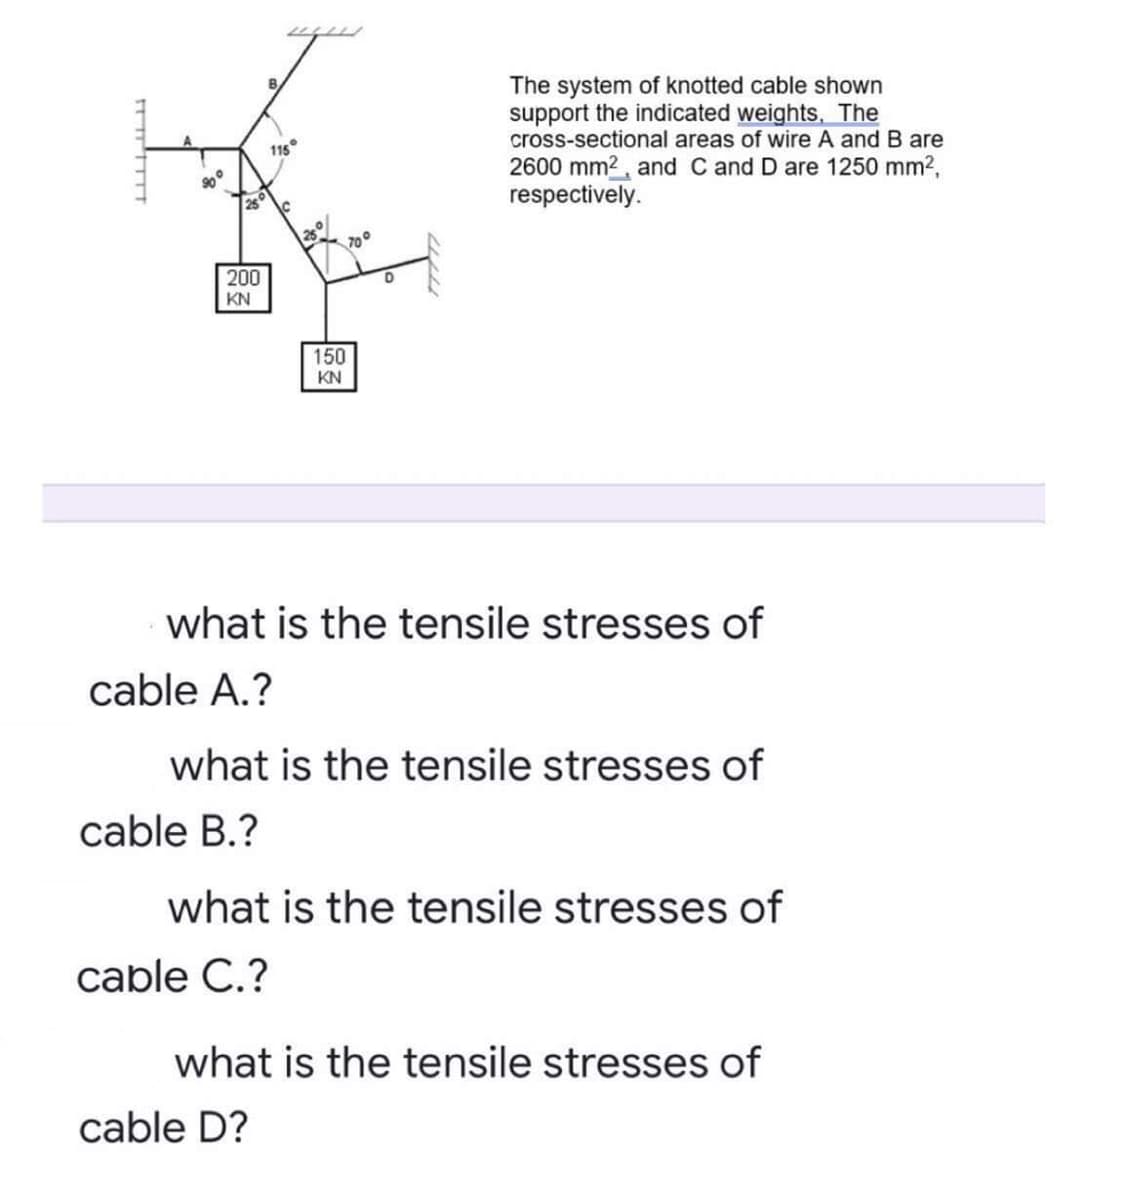 The system of knotted cable shown
support the indicated weights, The
cross-sectional areas of wire A and B are
115
2600 mm2, and C and D are 1250 mm2,
respectively.
700
200
KN
150
KN
what is the tensile stresses of
cable A.?
what is the tensile stresses of
cable B.?
what is the tensile stresses of
cable C.?
what is the tensile stresses of
cable D?
